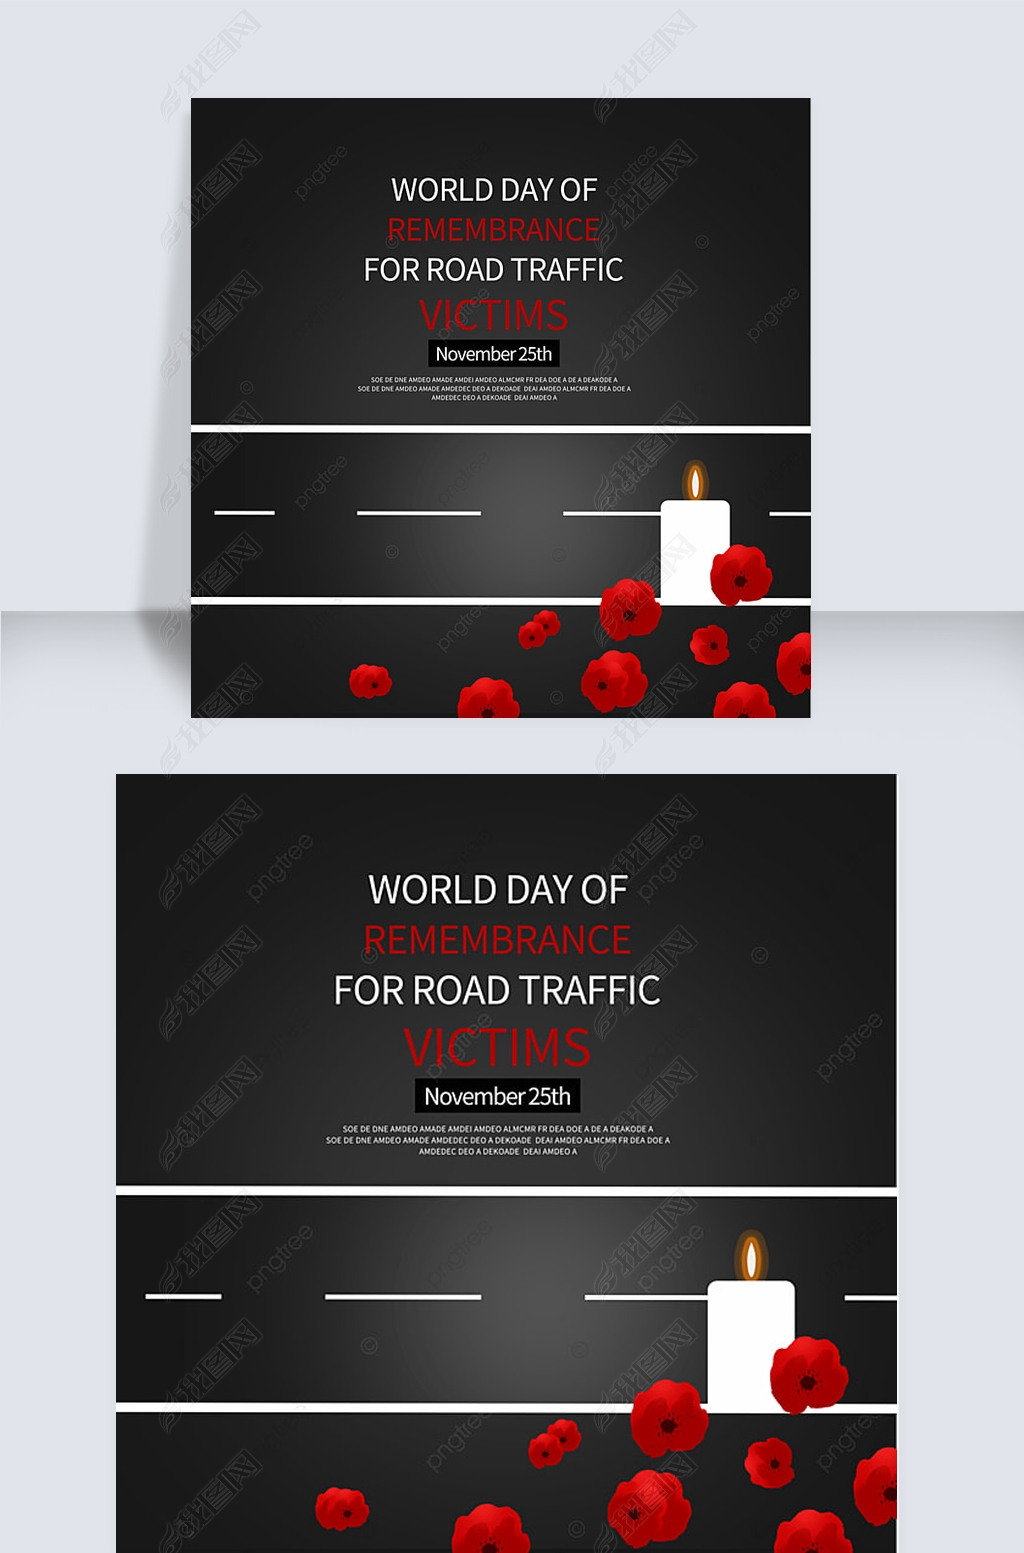 ɫworld day of remembrance for road traffic victims罻ýsns